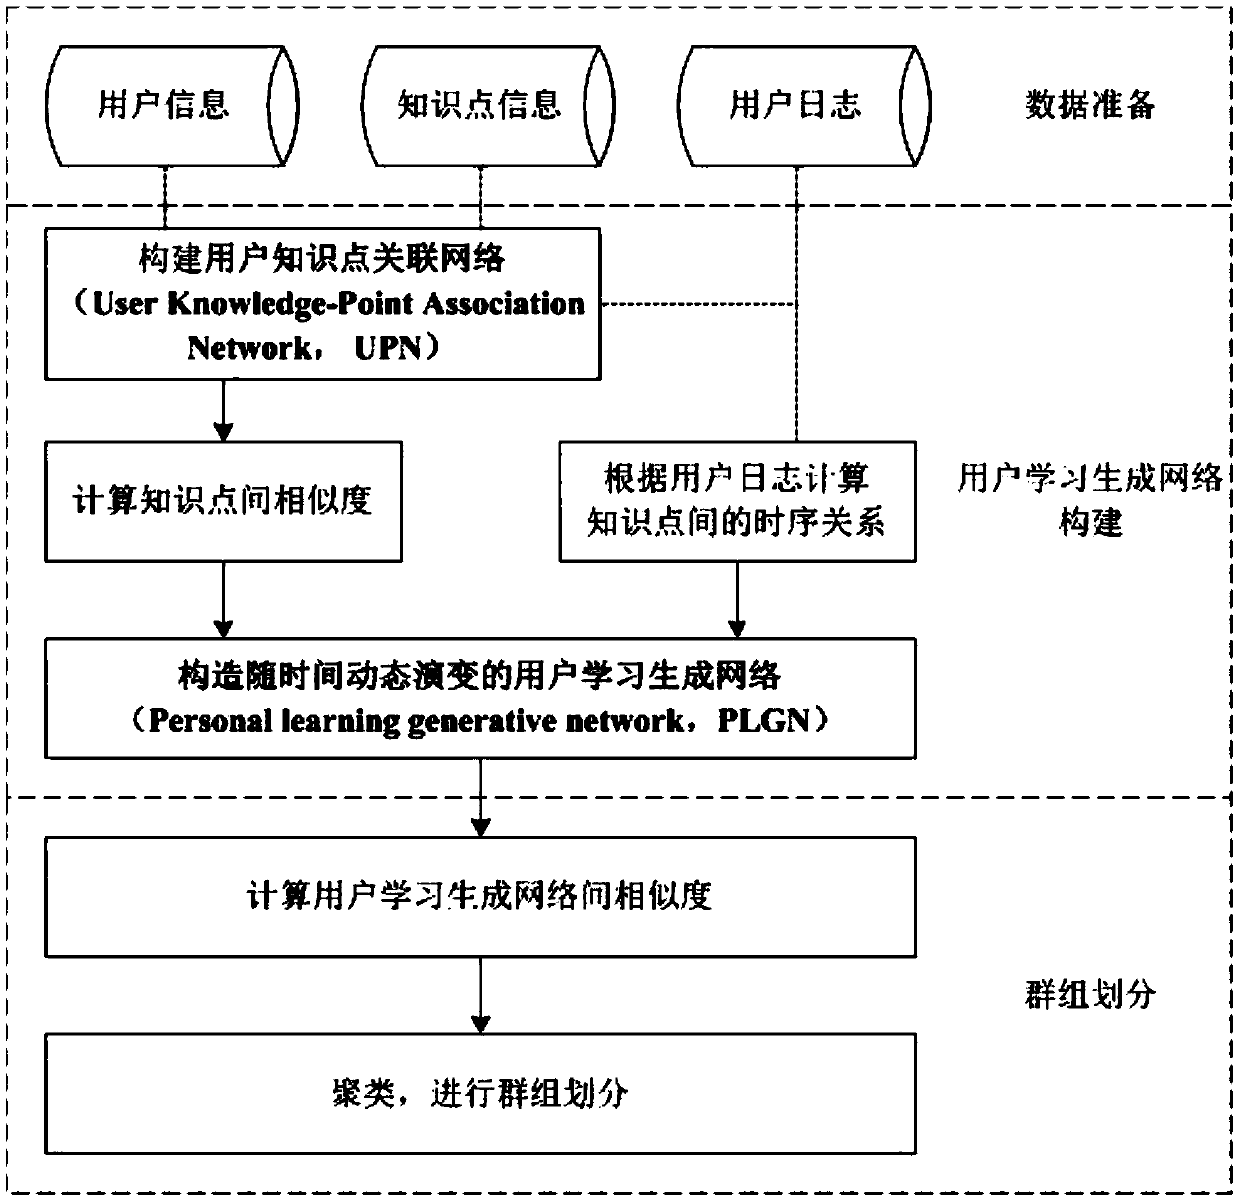 Network learning group division method based on similarity of learning generation networks